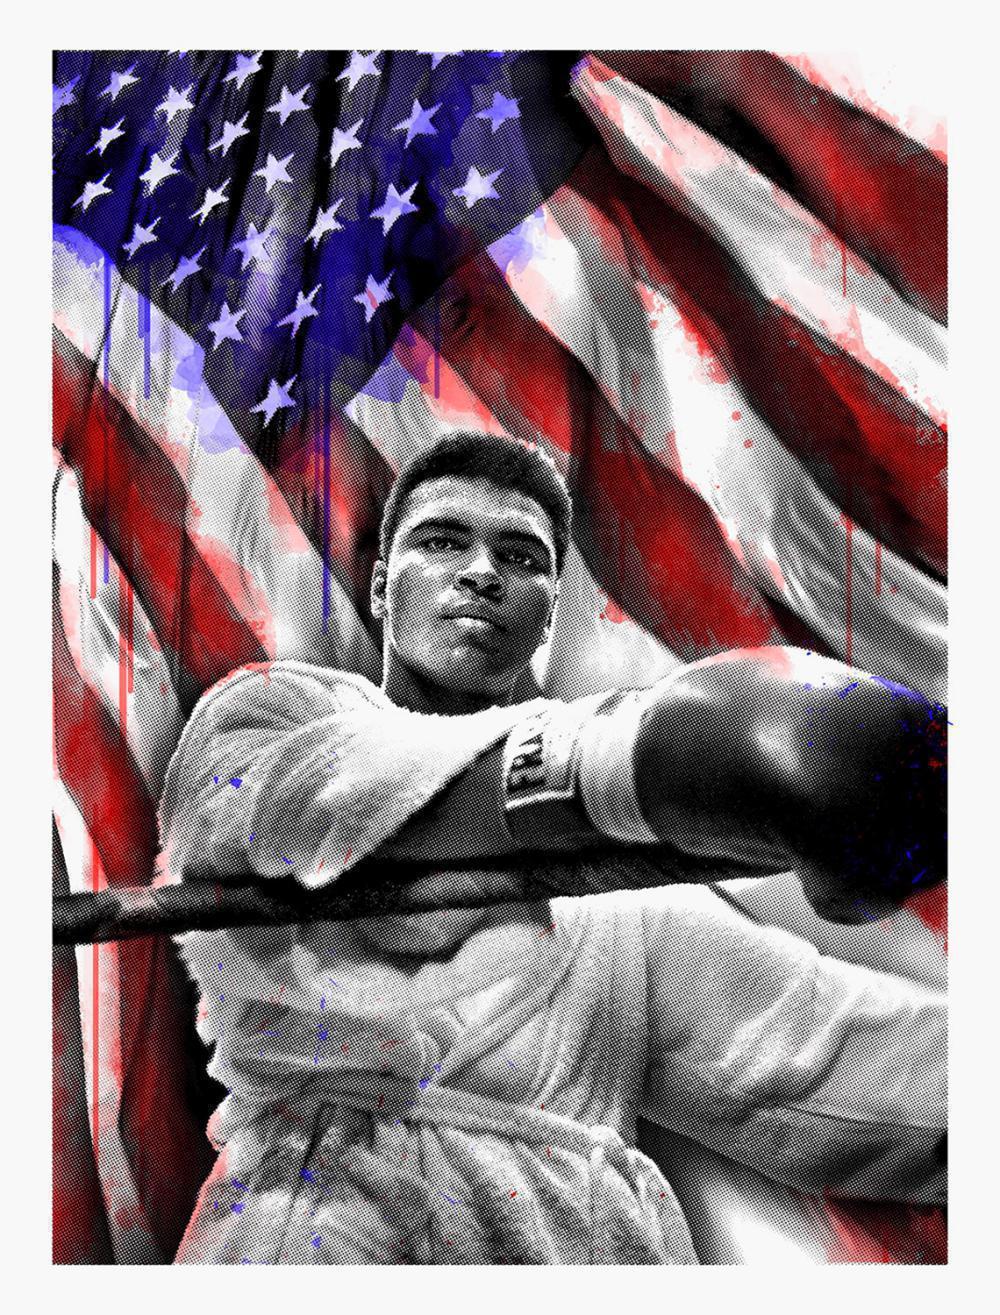 In celebration of an American legend, today we honor Muhammad Ali on what would have been his 77th birthday. For this edition print, Ali is embraced by the American Flag in the boxing ring, embodying his undeniable legacy of passion and power.